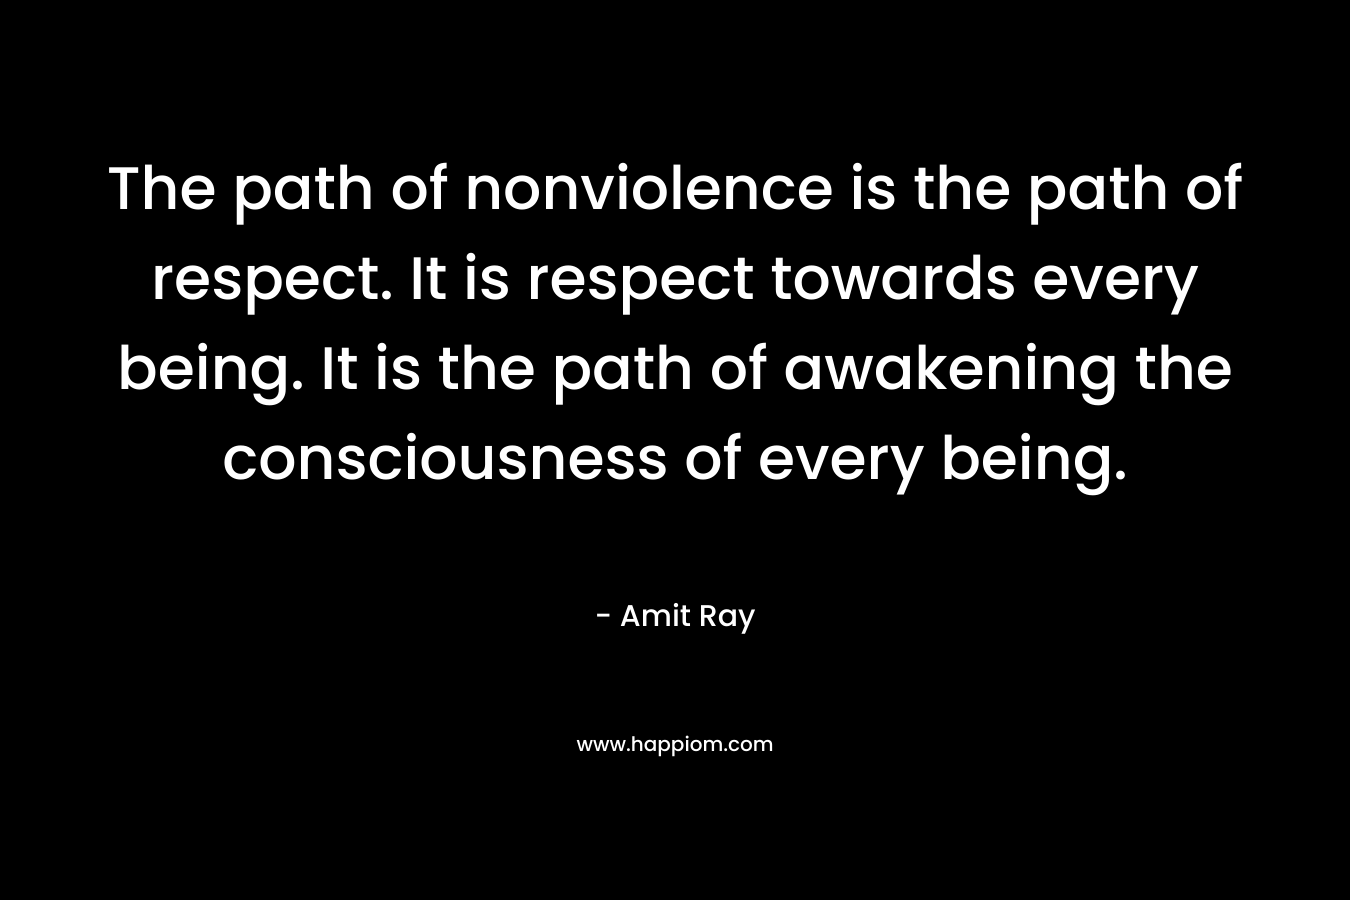 The path of nonviolence is the path of respect. It is respect towards every being. It is the path of awakening the consciousness of every being.